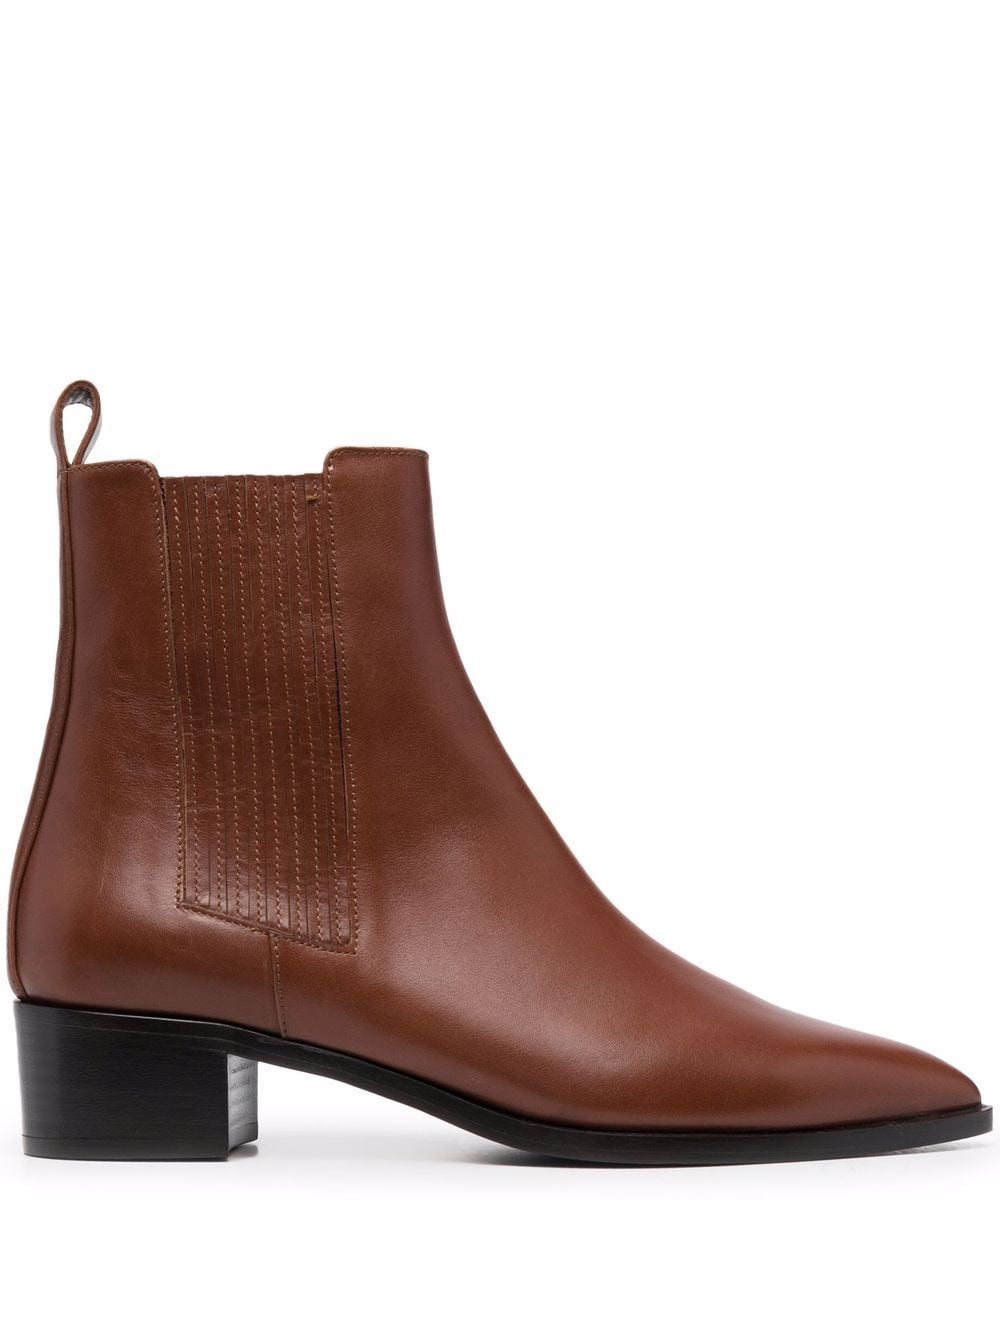 Scarosso Olivia leather ankle boots - Brown von Scarosso